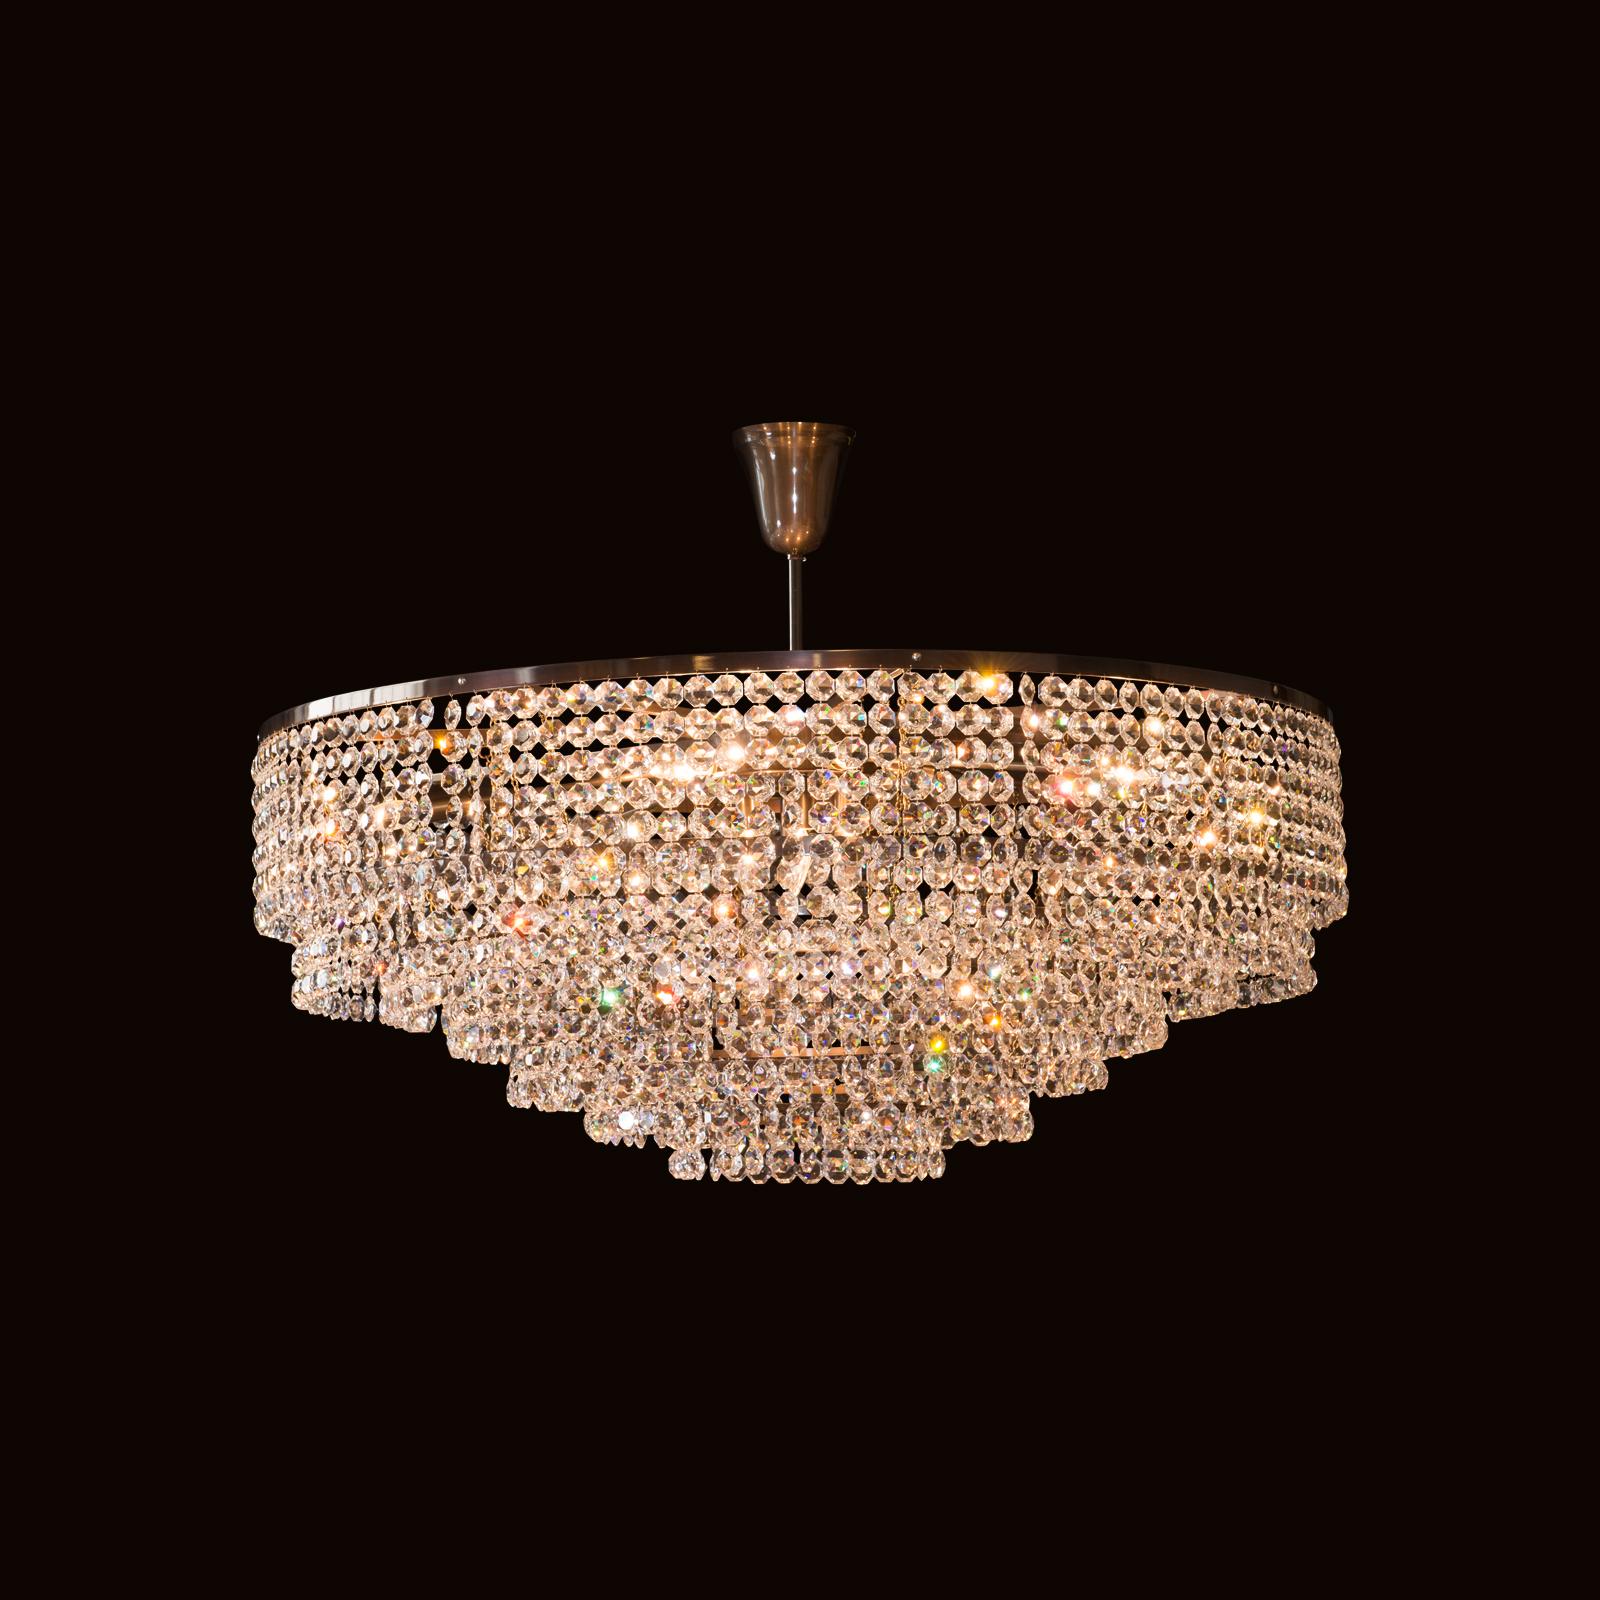 Hand-Crafted Big Crystal Chandelier in the Style of the 1960ies Re Edition For Sale